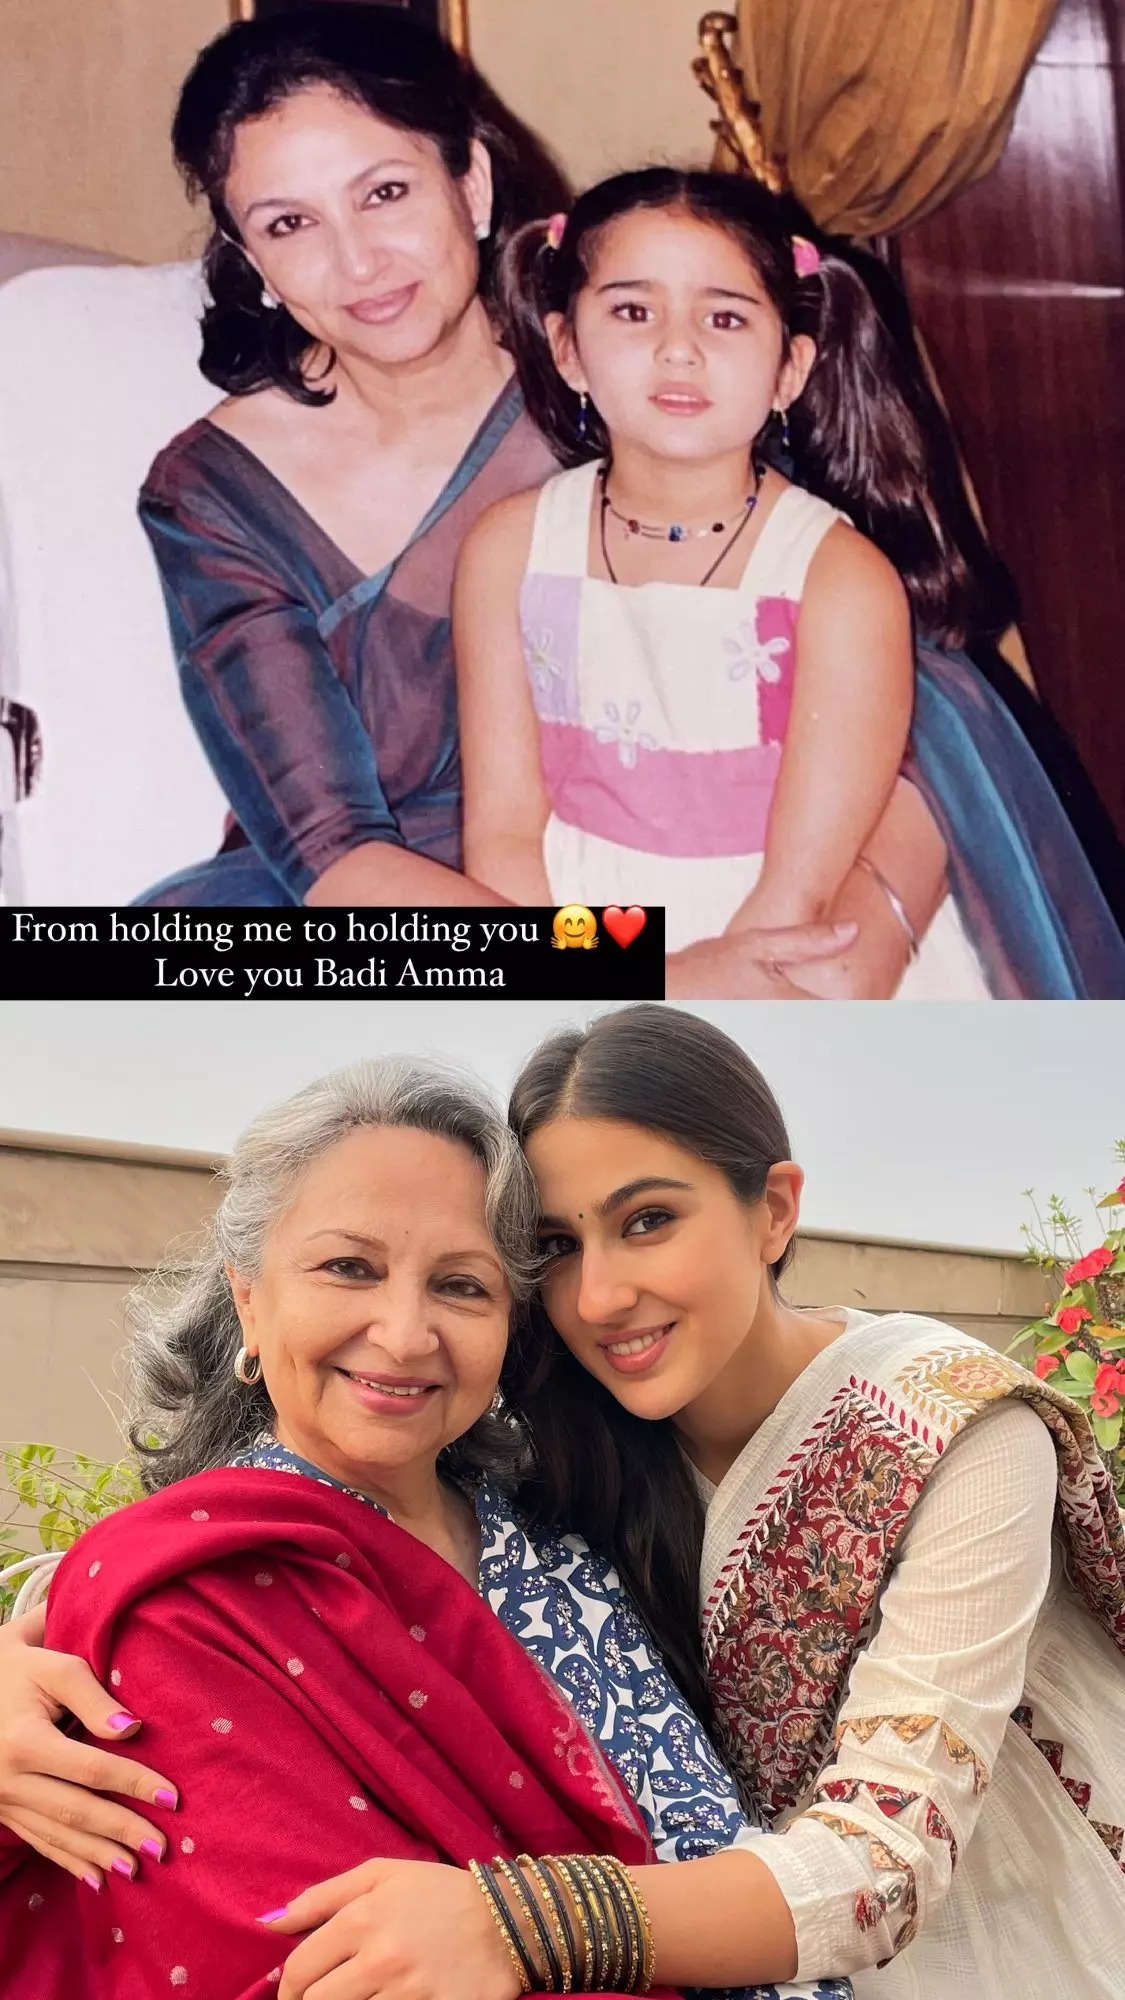 Sara Ali Khan shares adorable pictures with her 'badi amma' Sharmila Tagore - Times of India